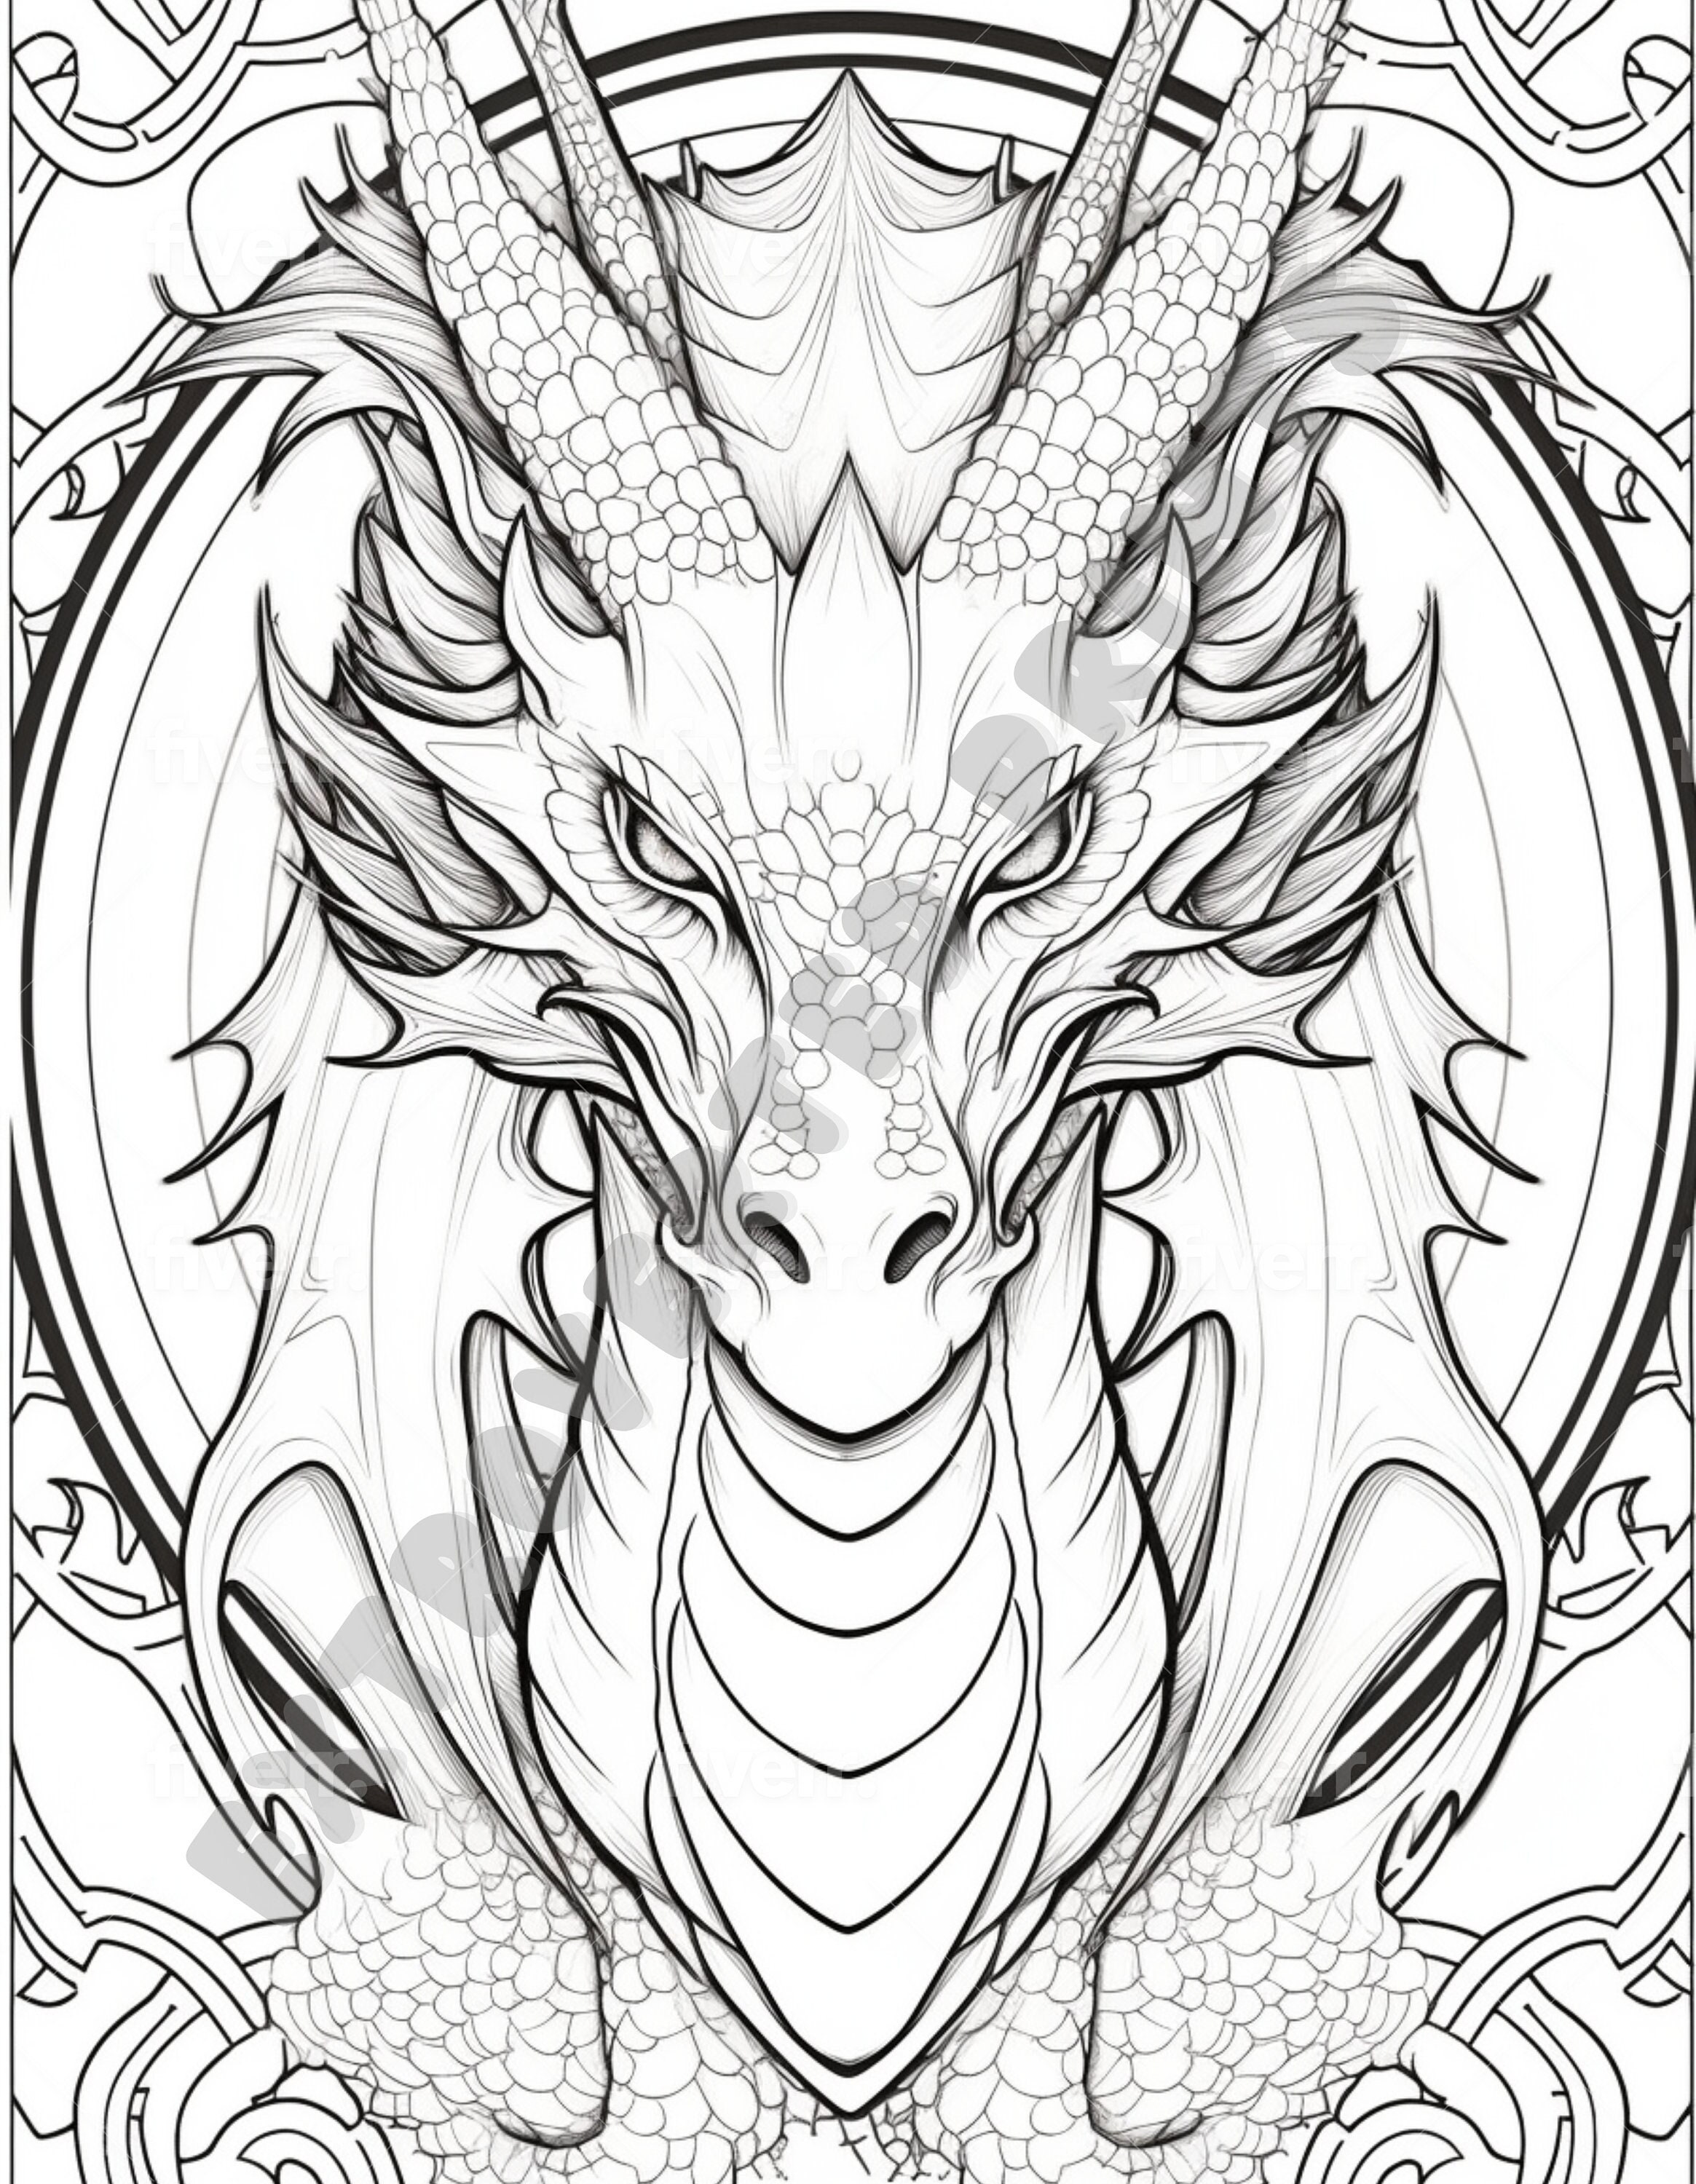 Caraxes Dragon Coloring Page for Kids and Adults Who Experience ADHD ...